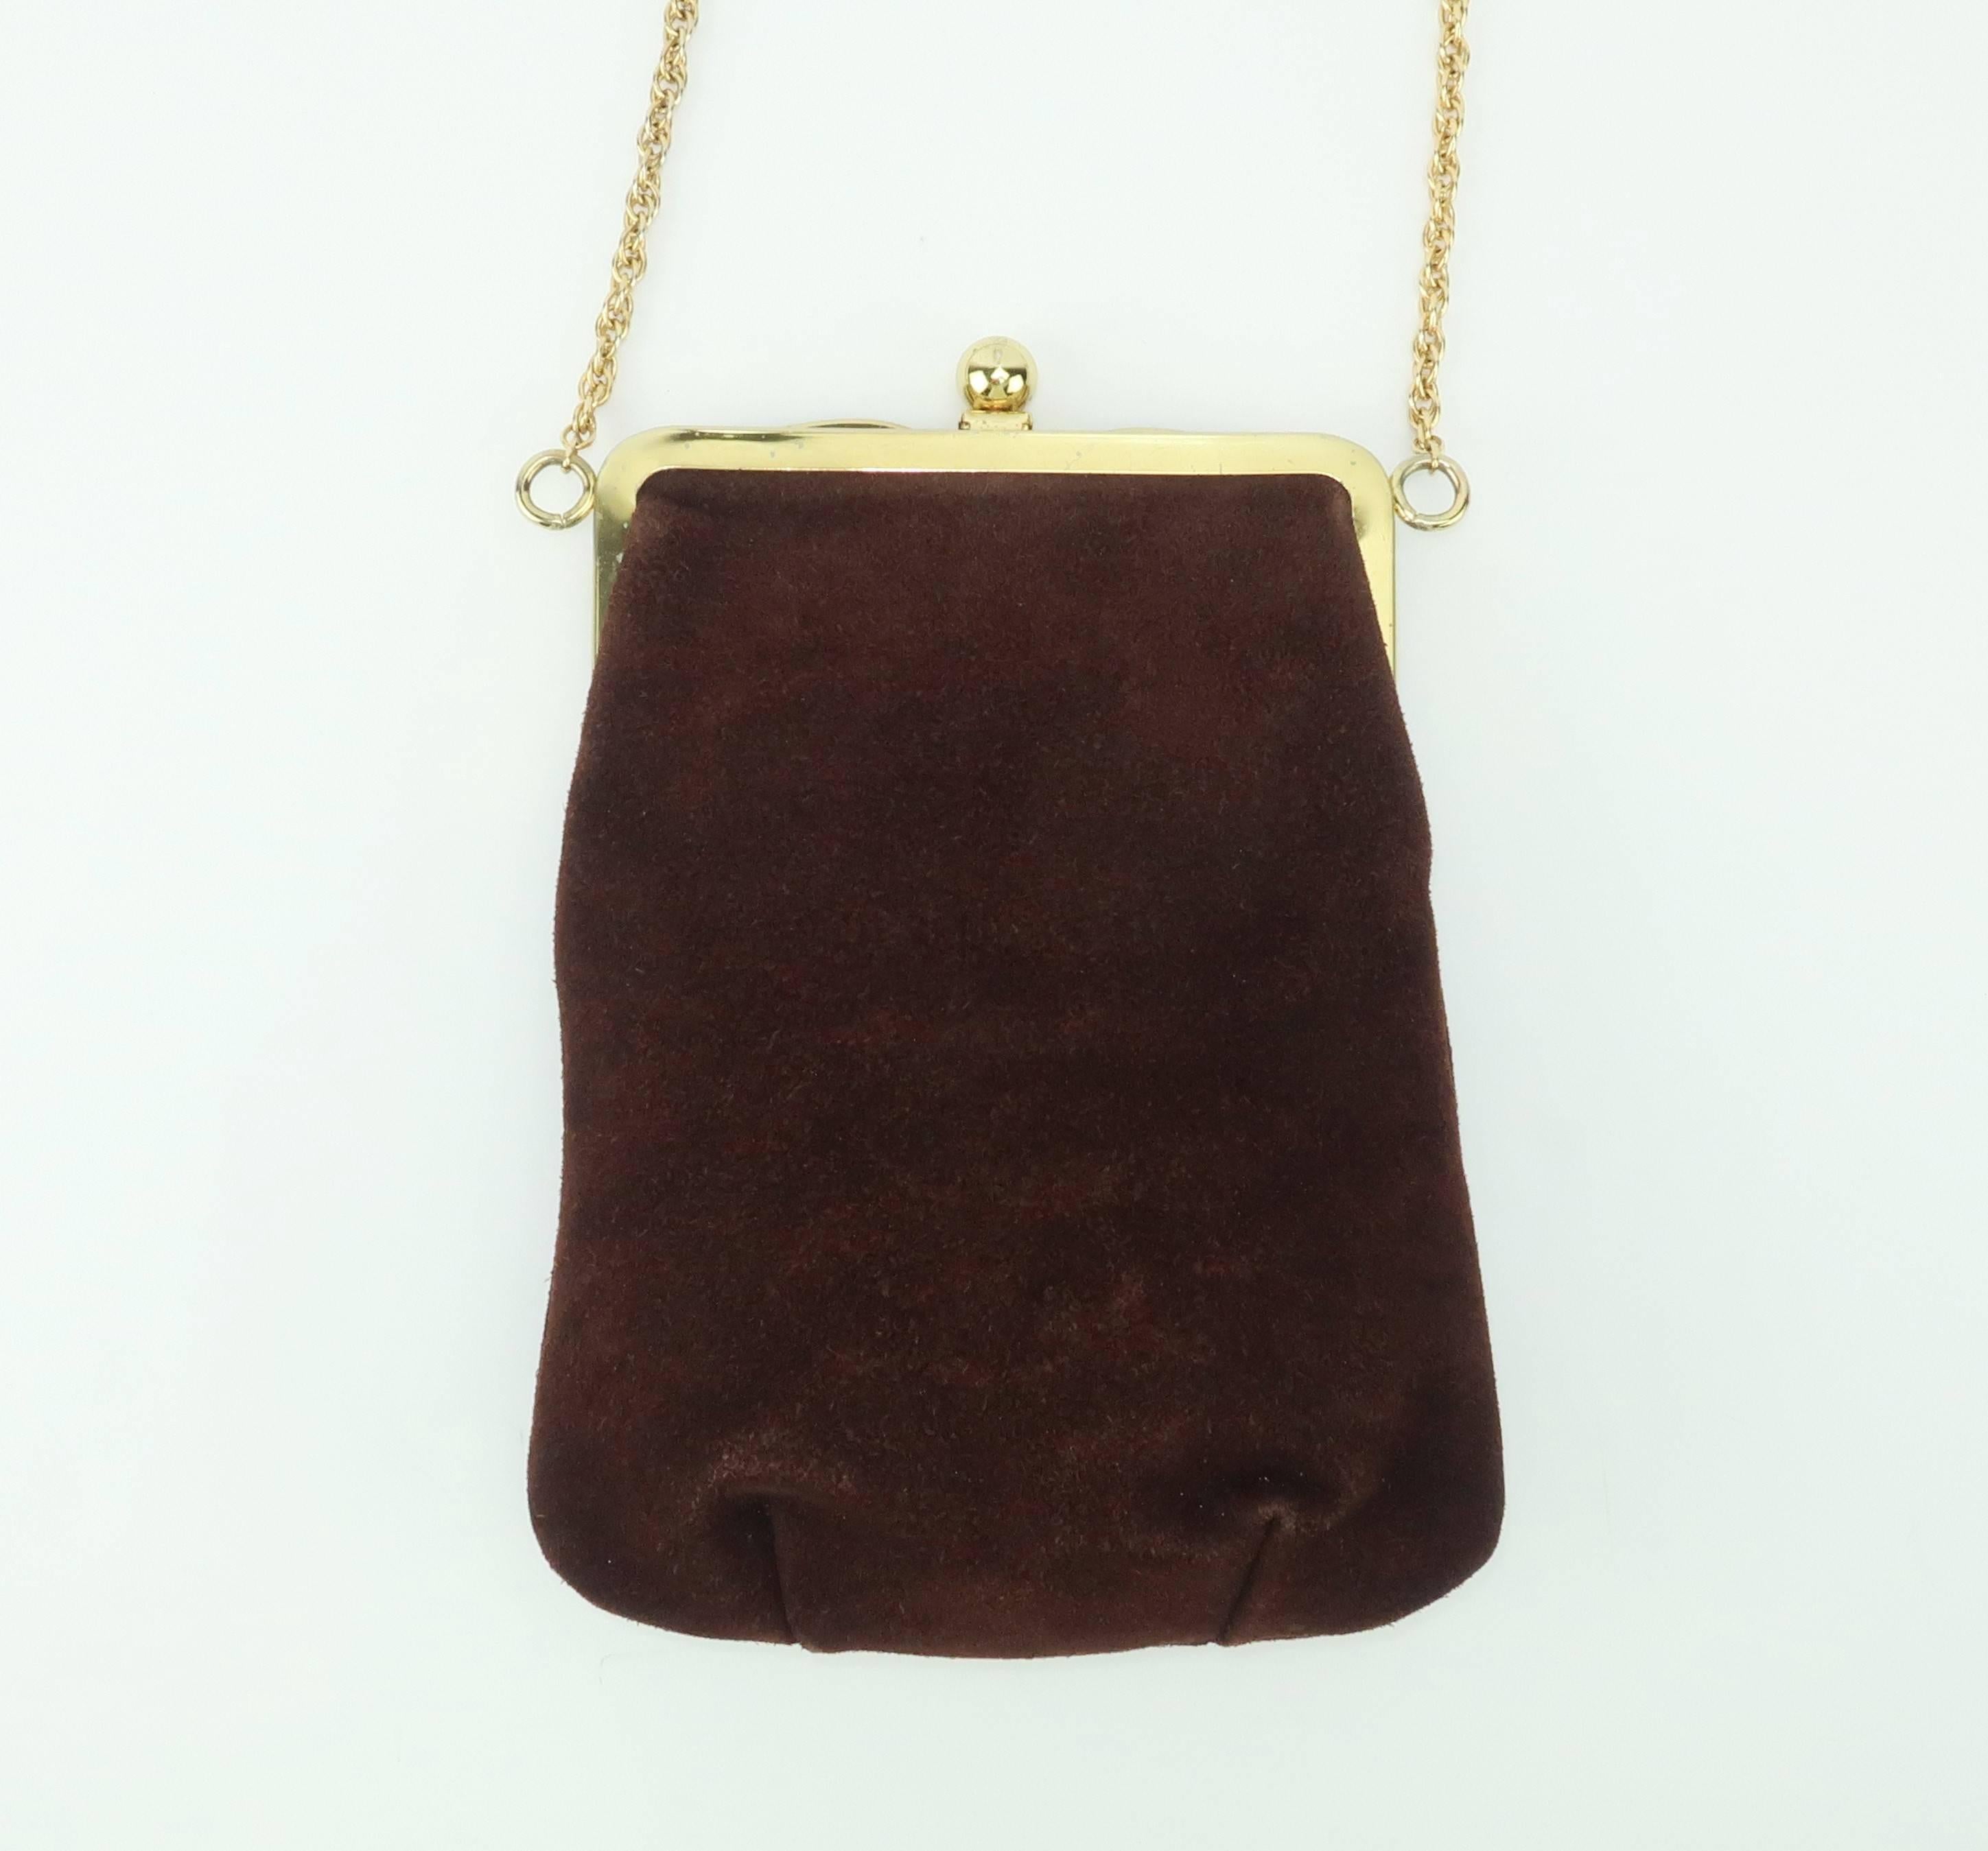 1960's Brown Suede Leather Handbag With Gold Chain Shoulder Handle 2